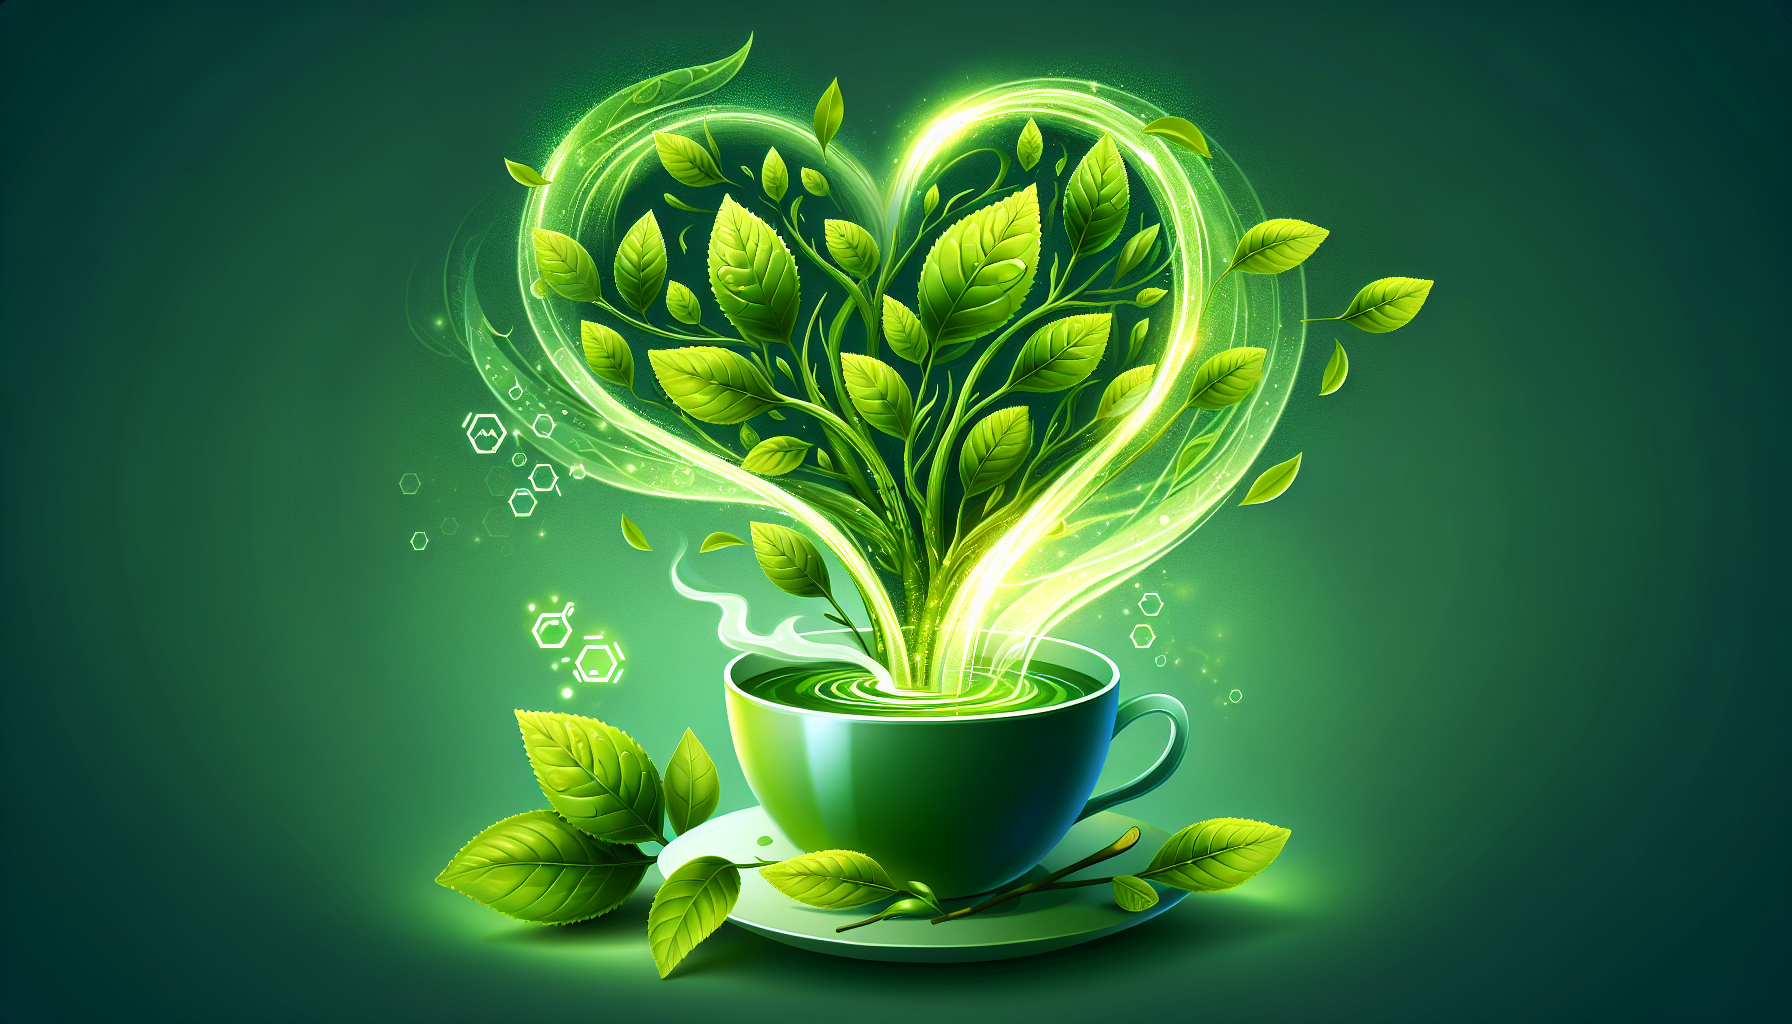 Illustration of green tea leaves and antioxidant support for cholesterol control